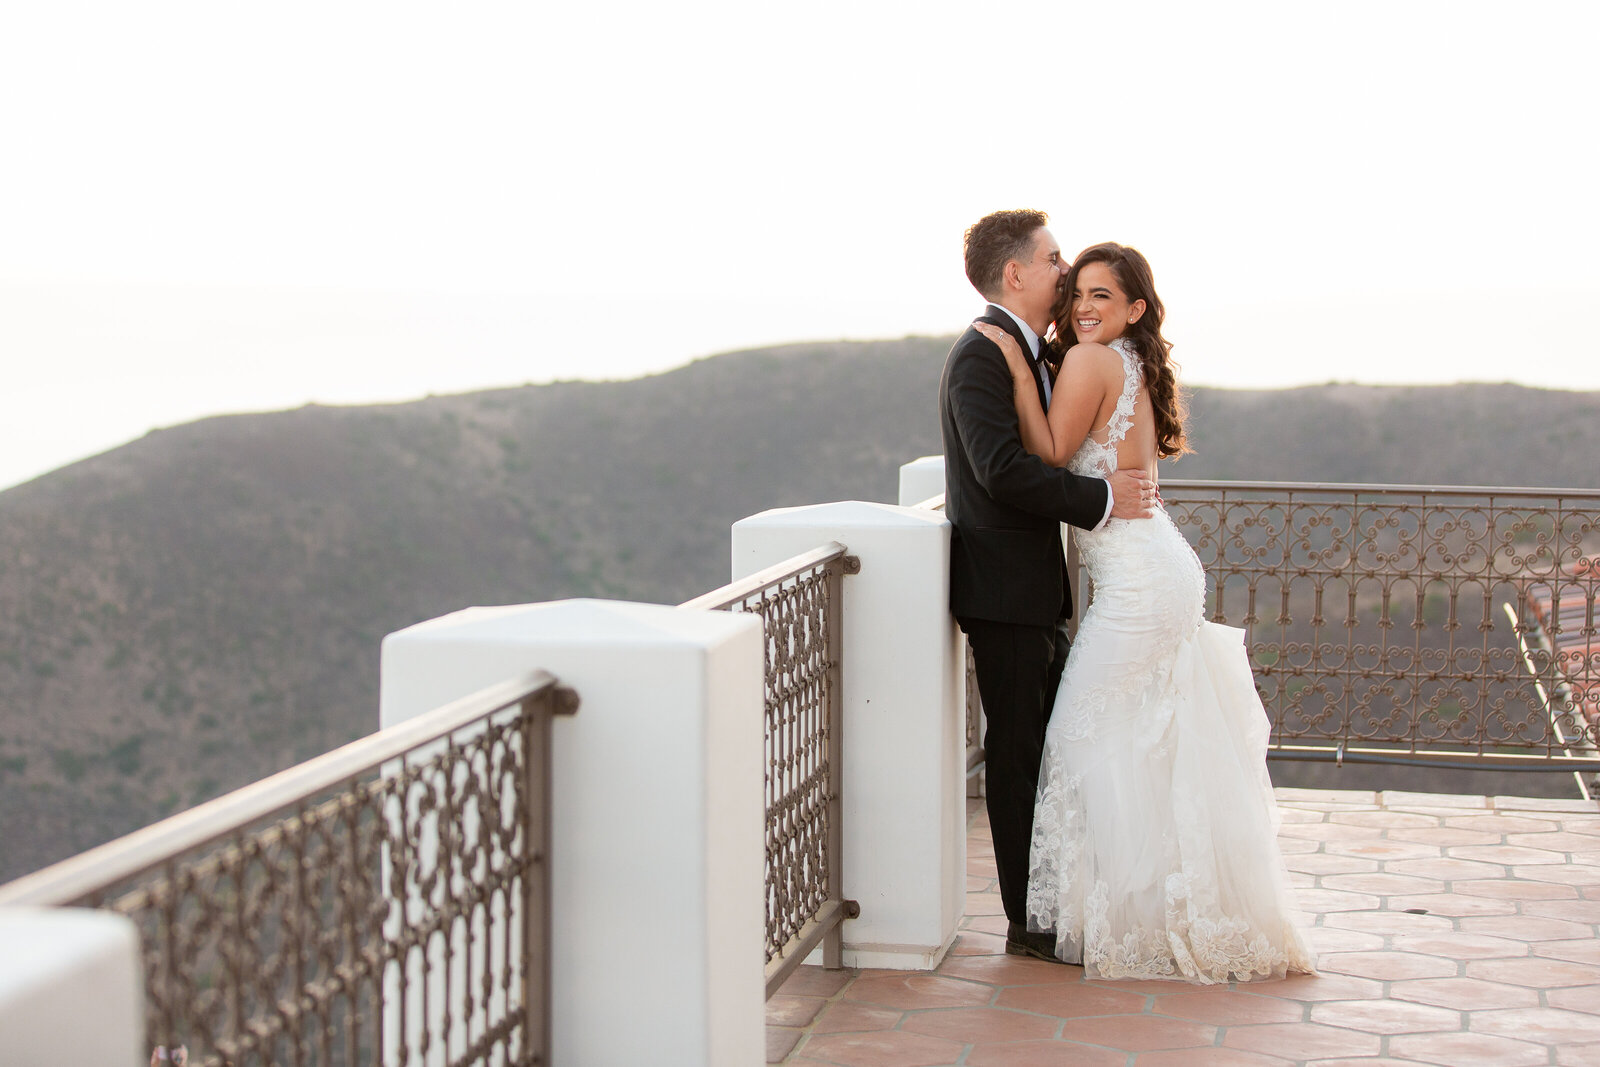 Groom kissing bride while she smiles sweetly overlooking the mountains with Dallas wedding photographer